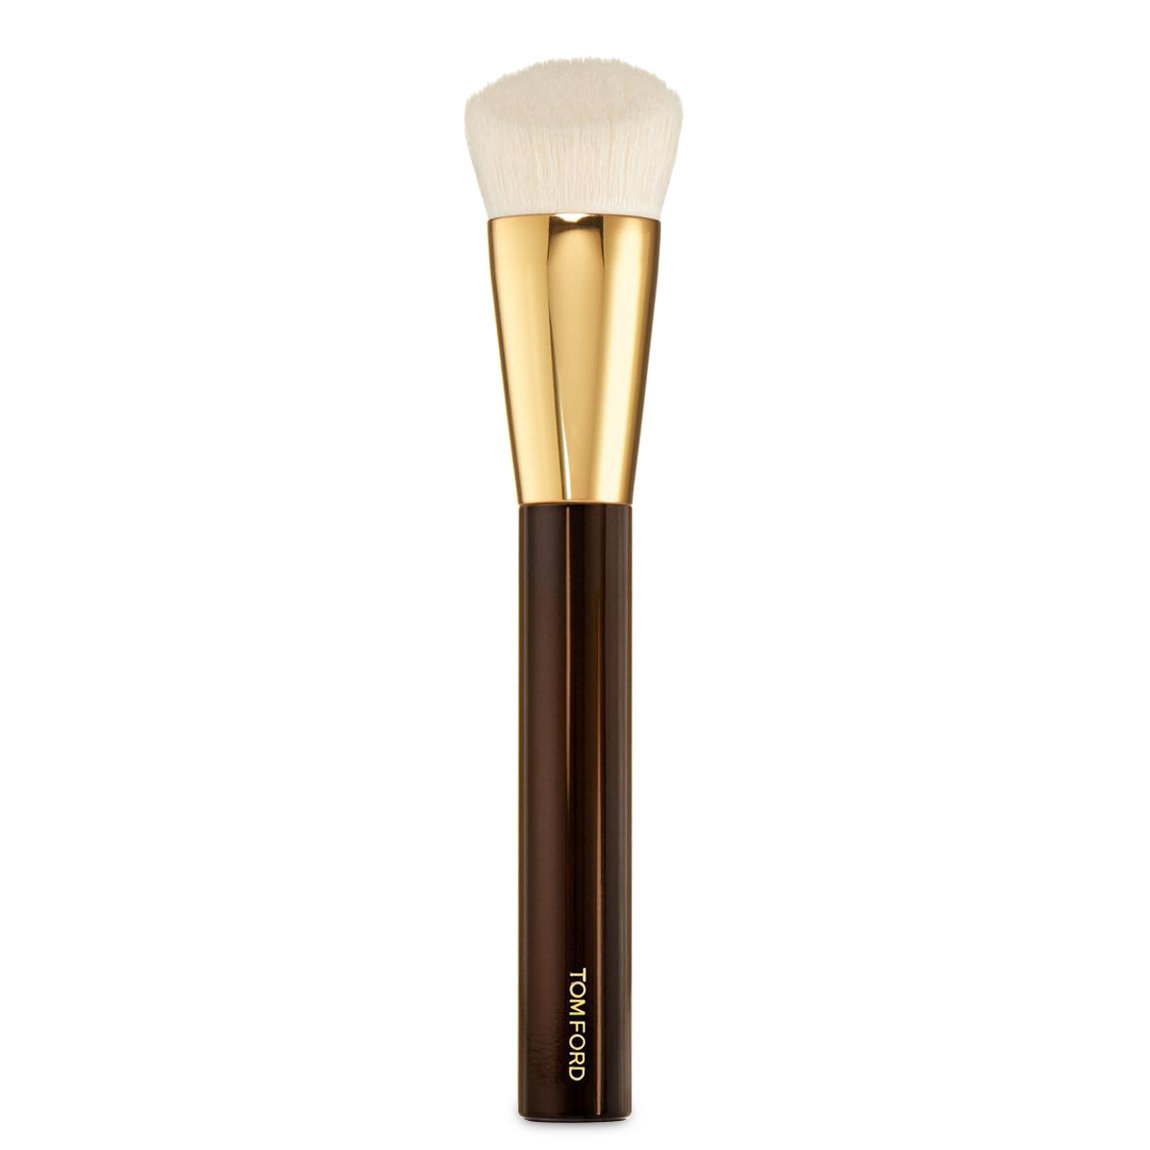 TOM FORD Shade and Illuminate Foundation Brush 2.5 alternative view 1 - product swatch.